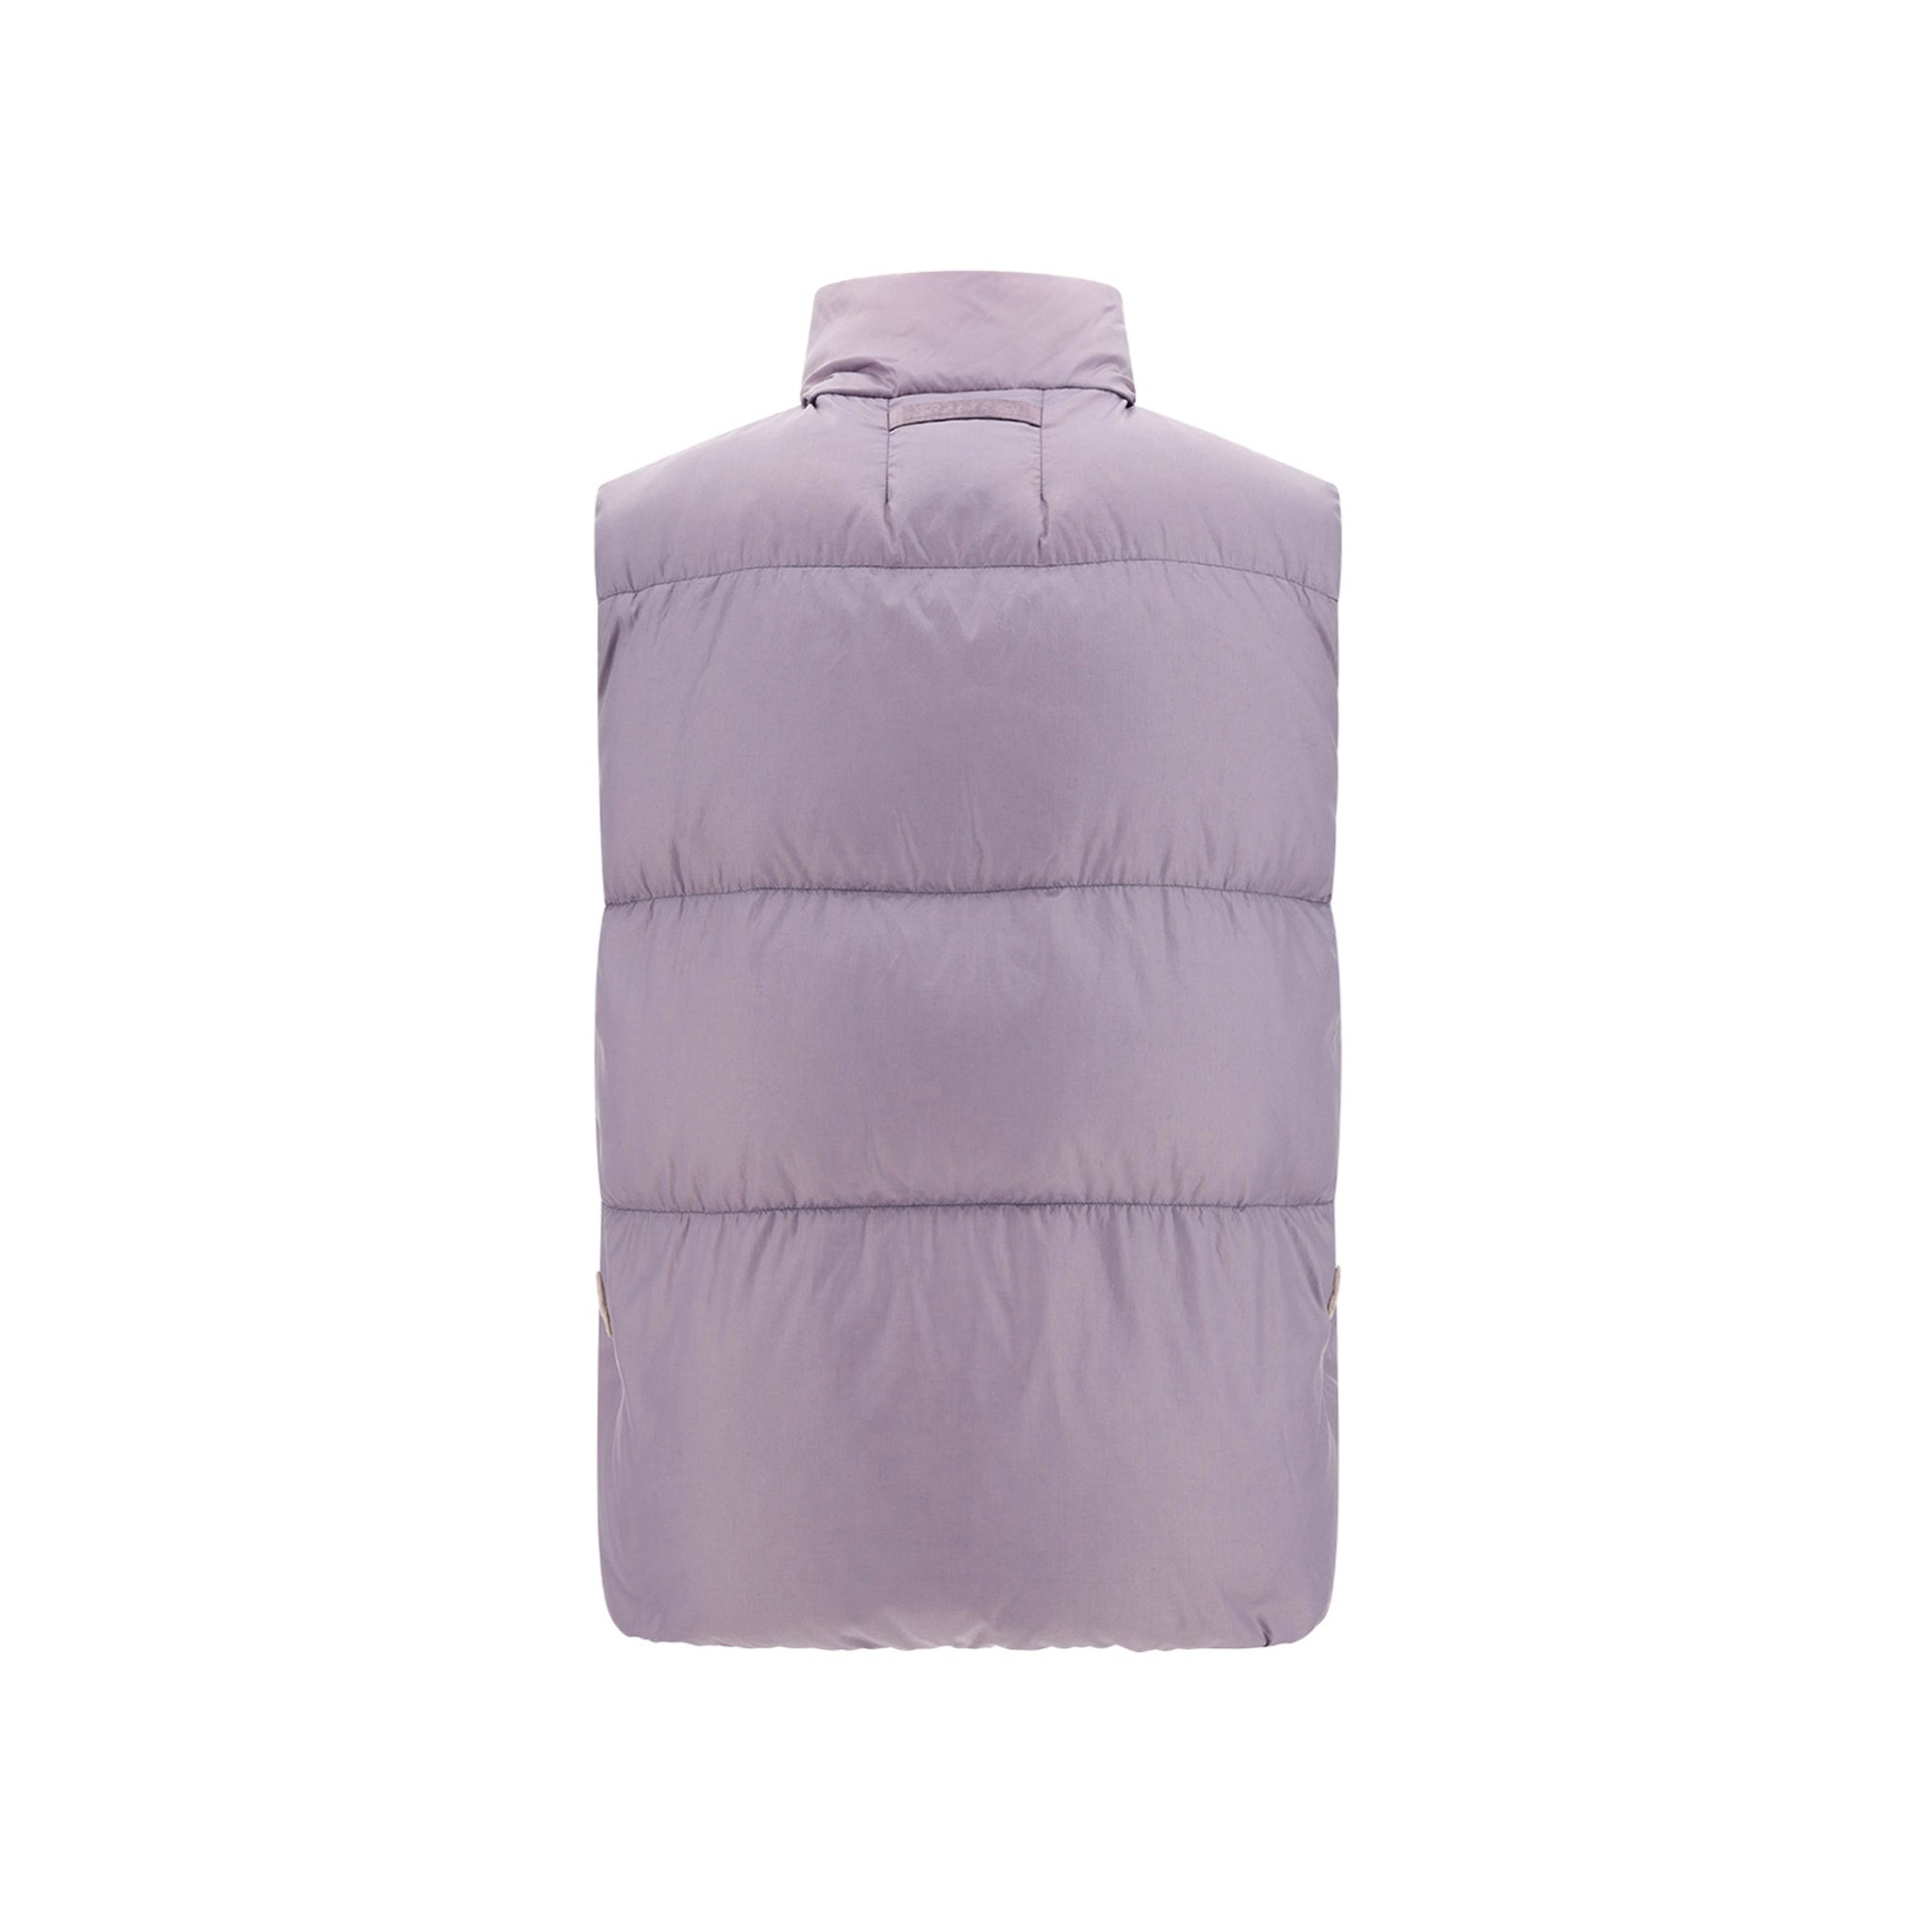 MONCLER-OUTLET-SALE-Moncler-Islote-Padded-Gilet-Unterwasche-LILAC-1-ARCHIVE-COLLECTION-2.jpg